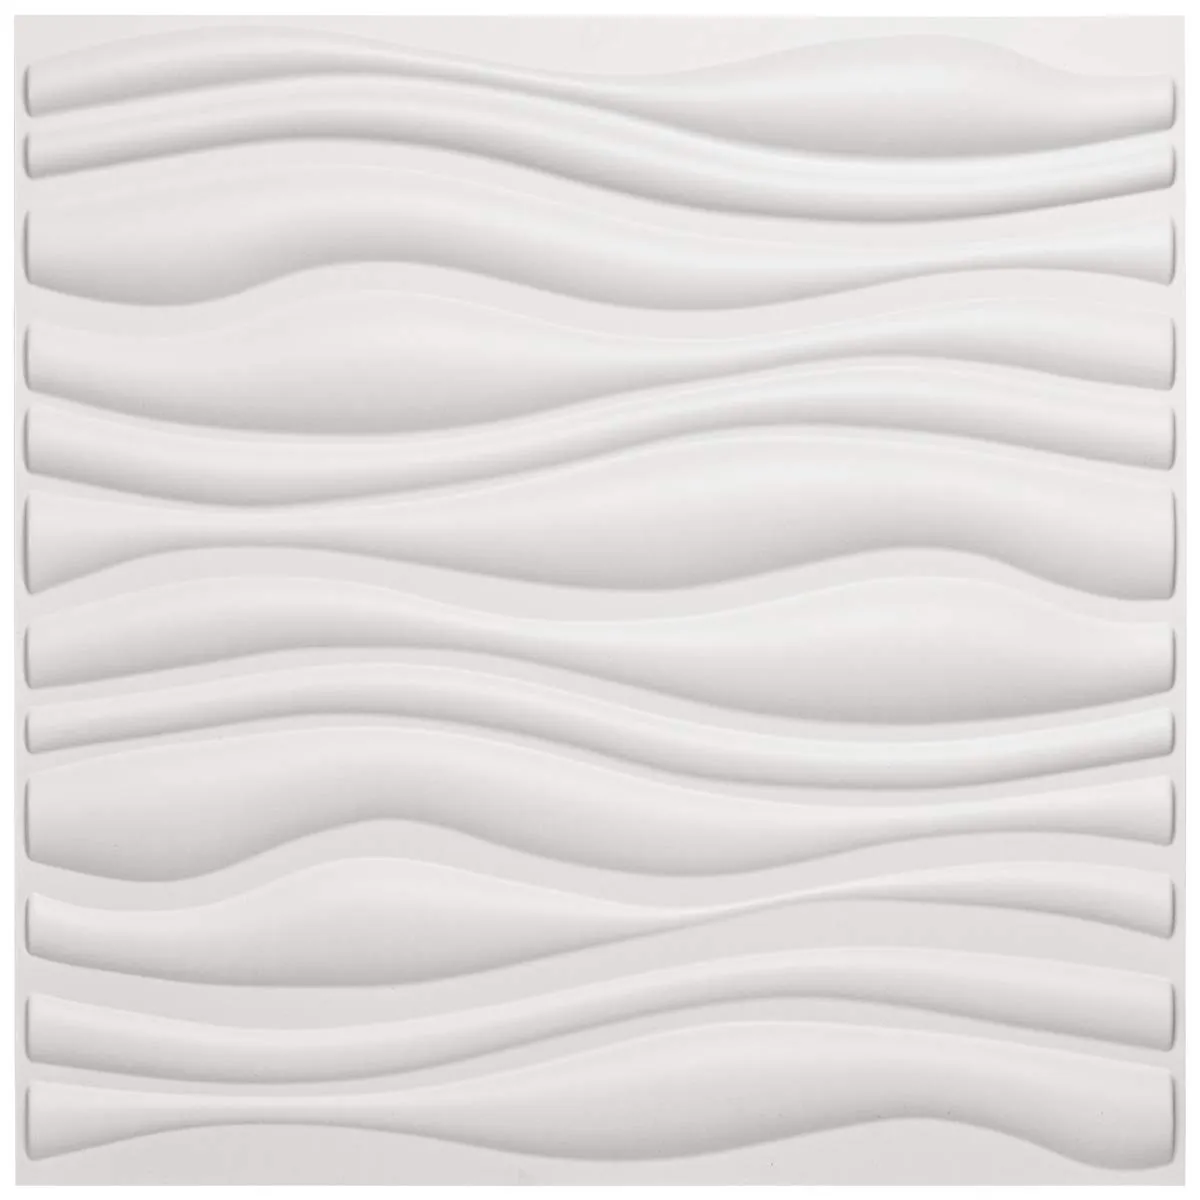 Art3d 50x50cm White Wall Panels PVC Wave Board Textured Soundproof for Living Room Bedroom (Pack of 12 Tiles)